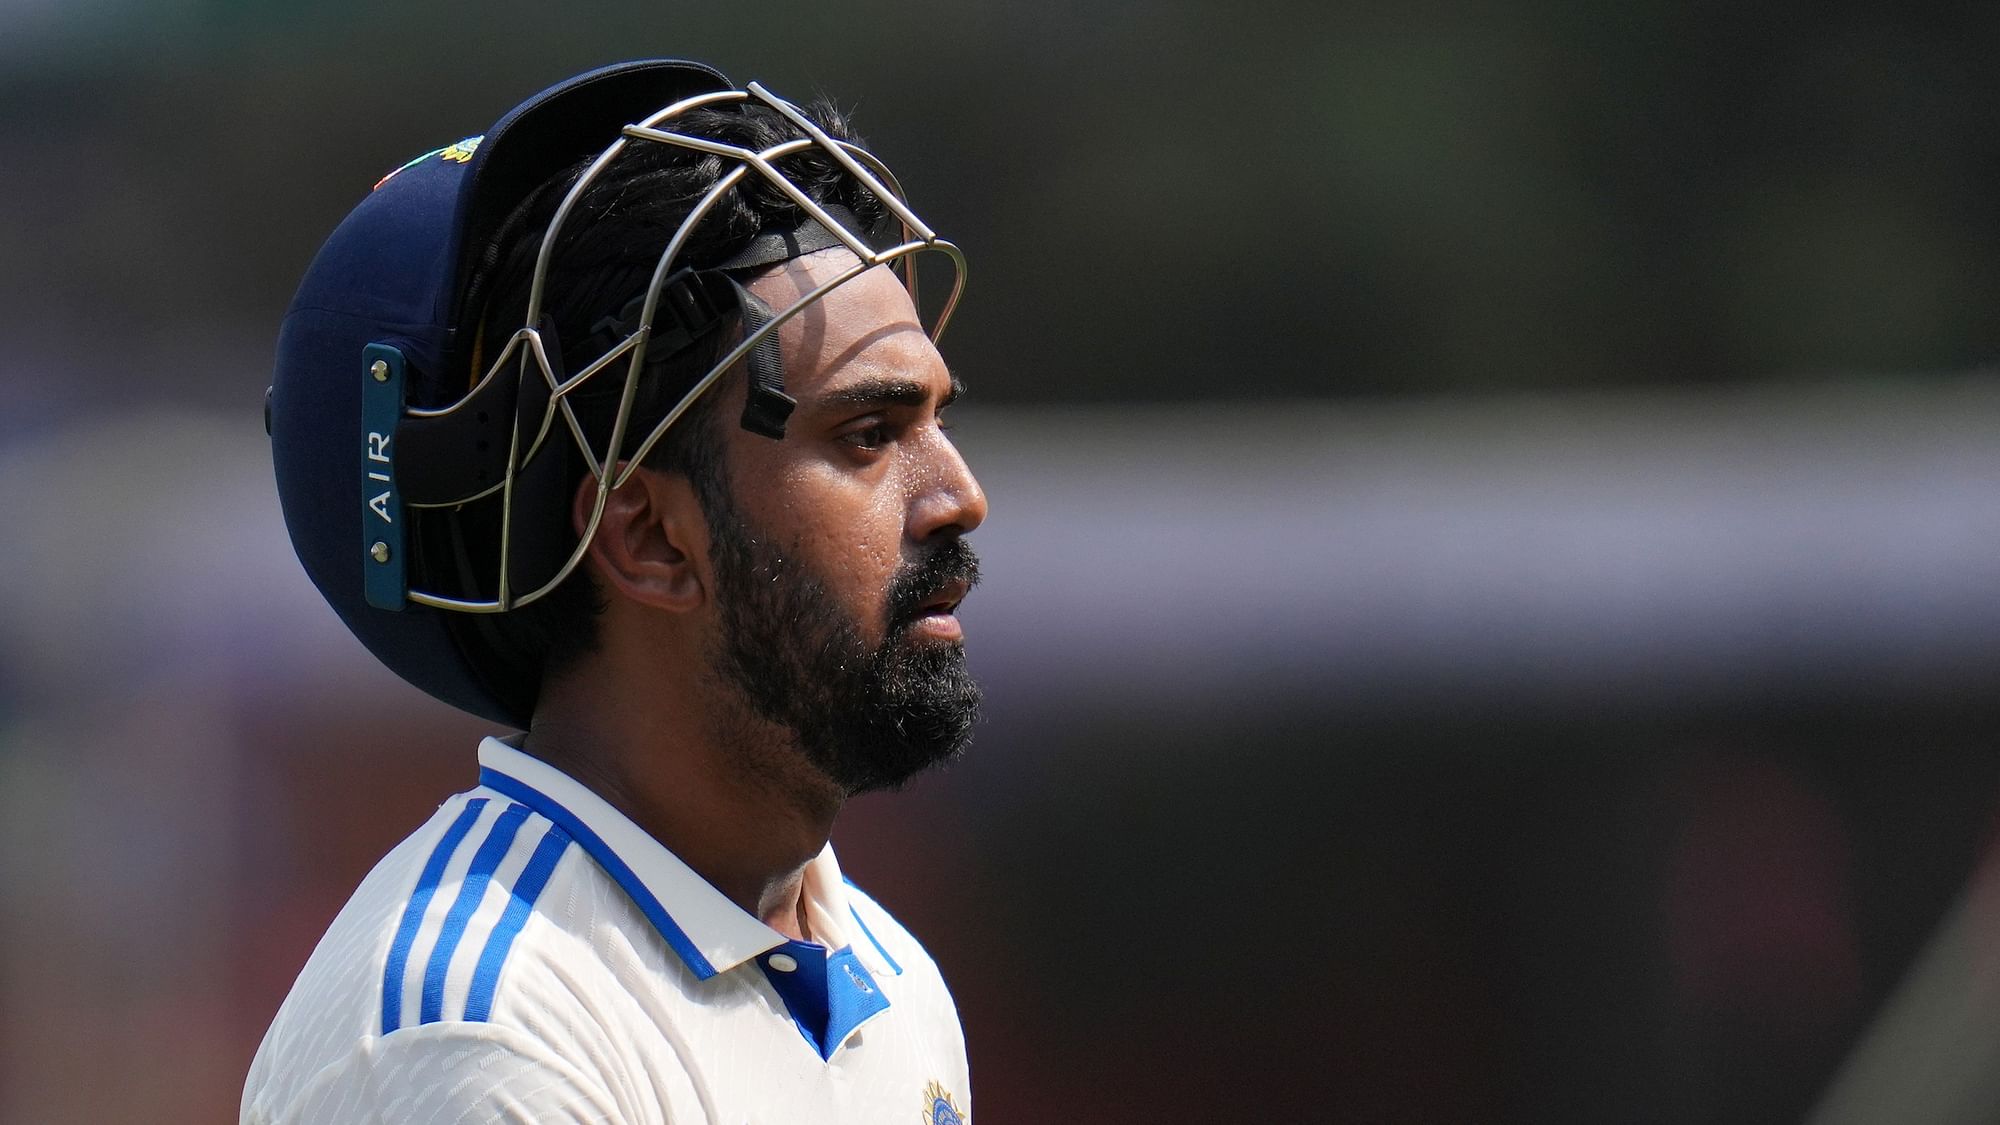 <div class="paragraphs"><p>Injured KL Rahul has been replaced by&nbsp;Devdutt Padikkal in the Indian squad for the third Test due to injury.&nbsp;</p></div>